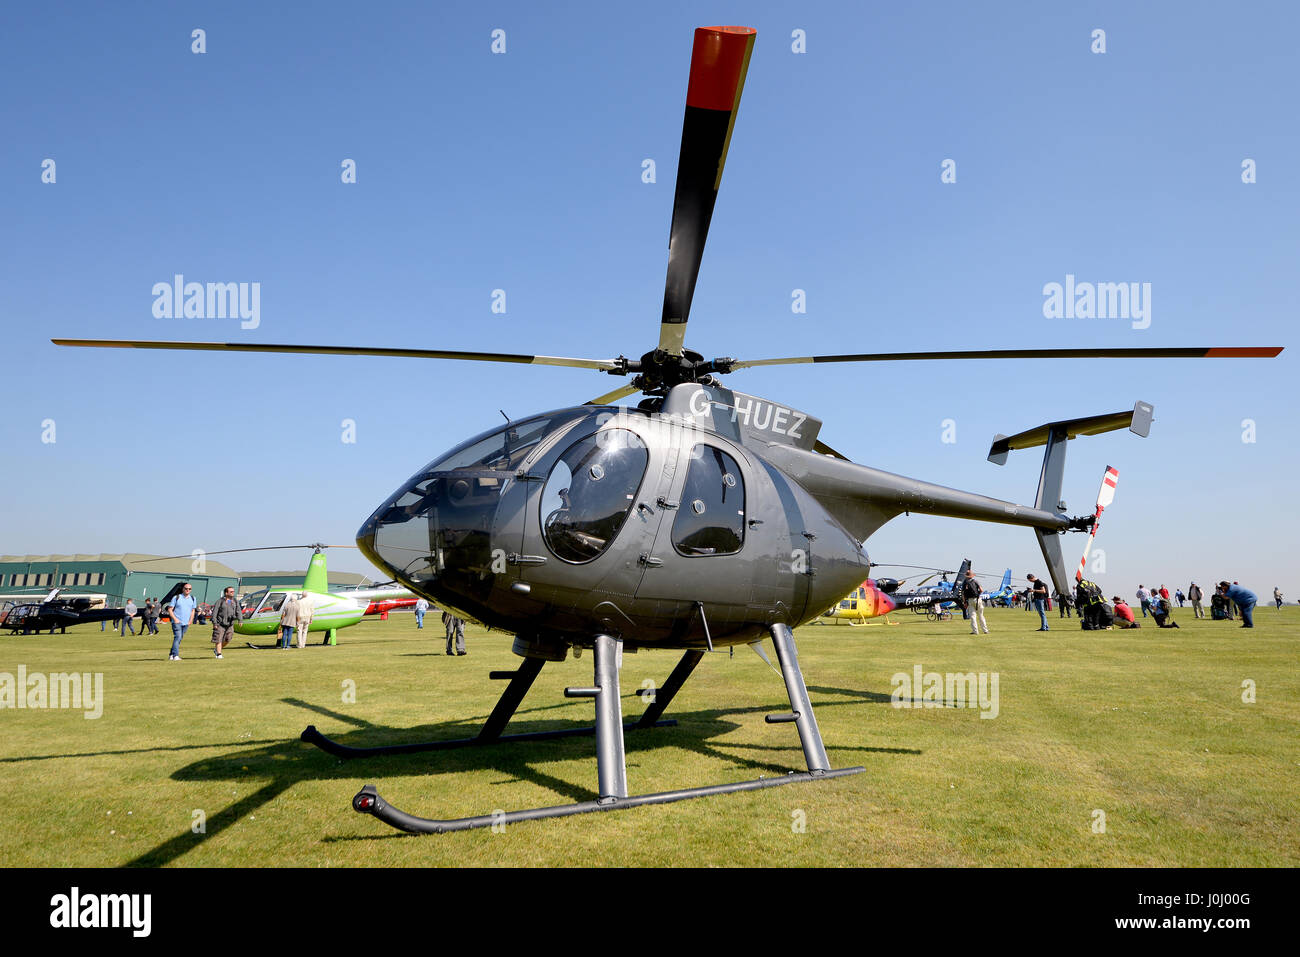 MD Hughes 500 helicopter G-HUEZ owned by Falcon Helicopters Ltd, on the ground during a helicopter fly-in Stock Photo